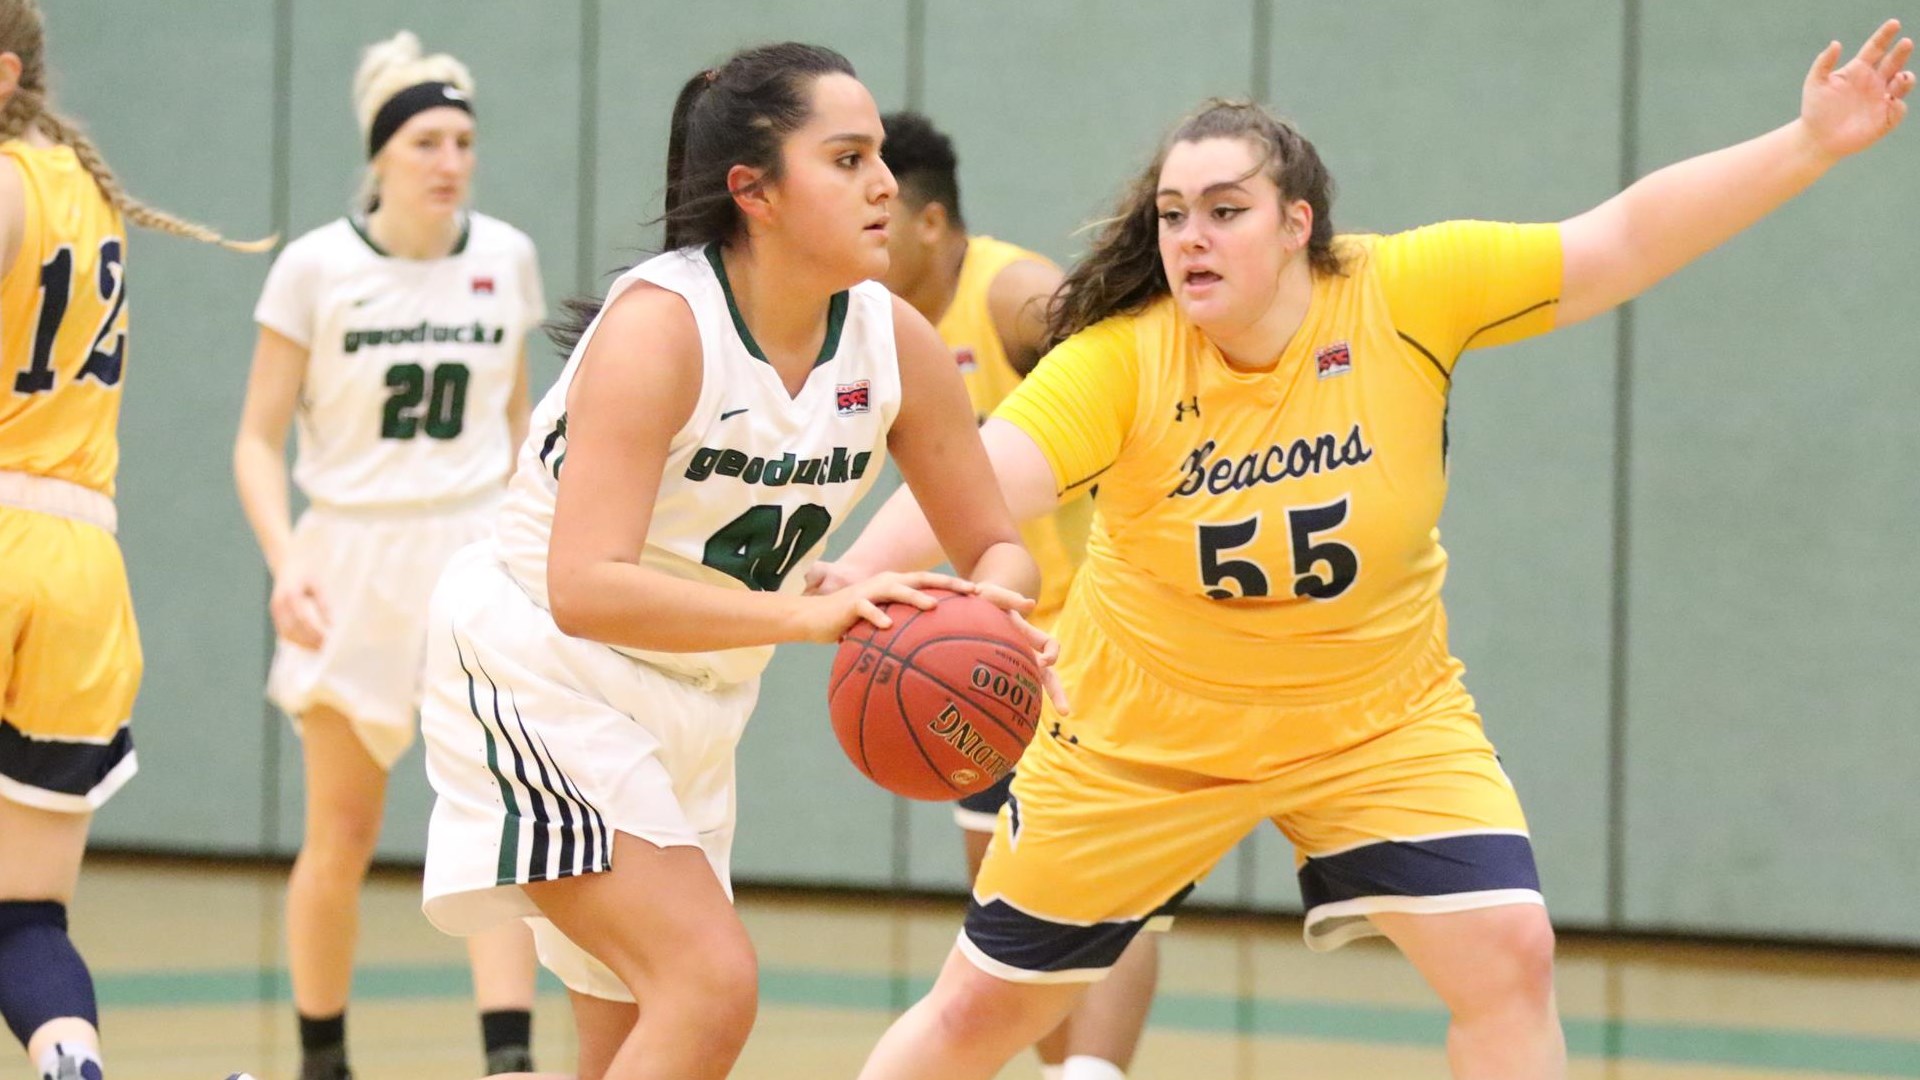 Merrily Jones (Cayuse Tribe) tallied 13 points, 15 rebounds for Evergreen State College